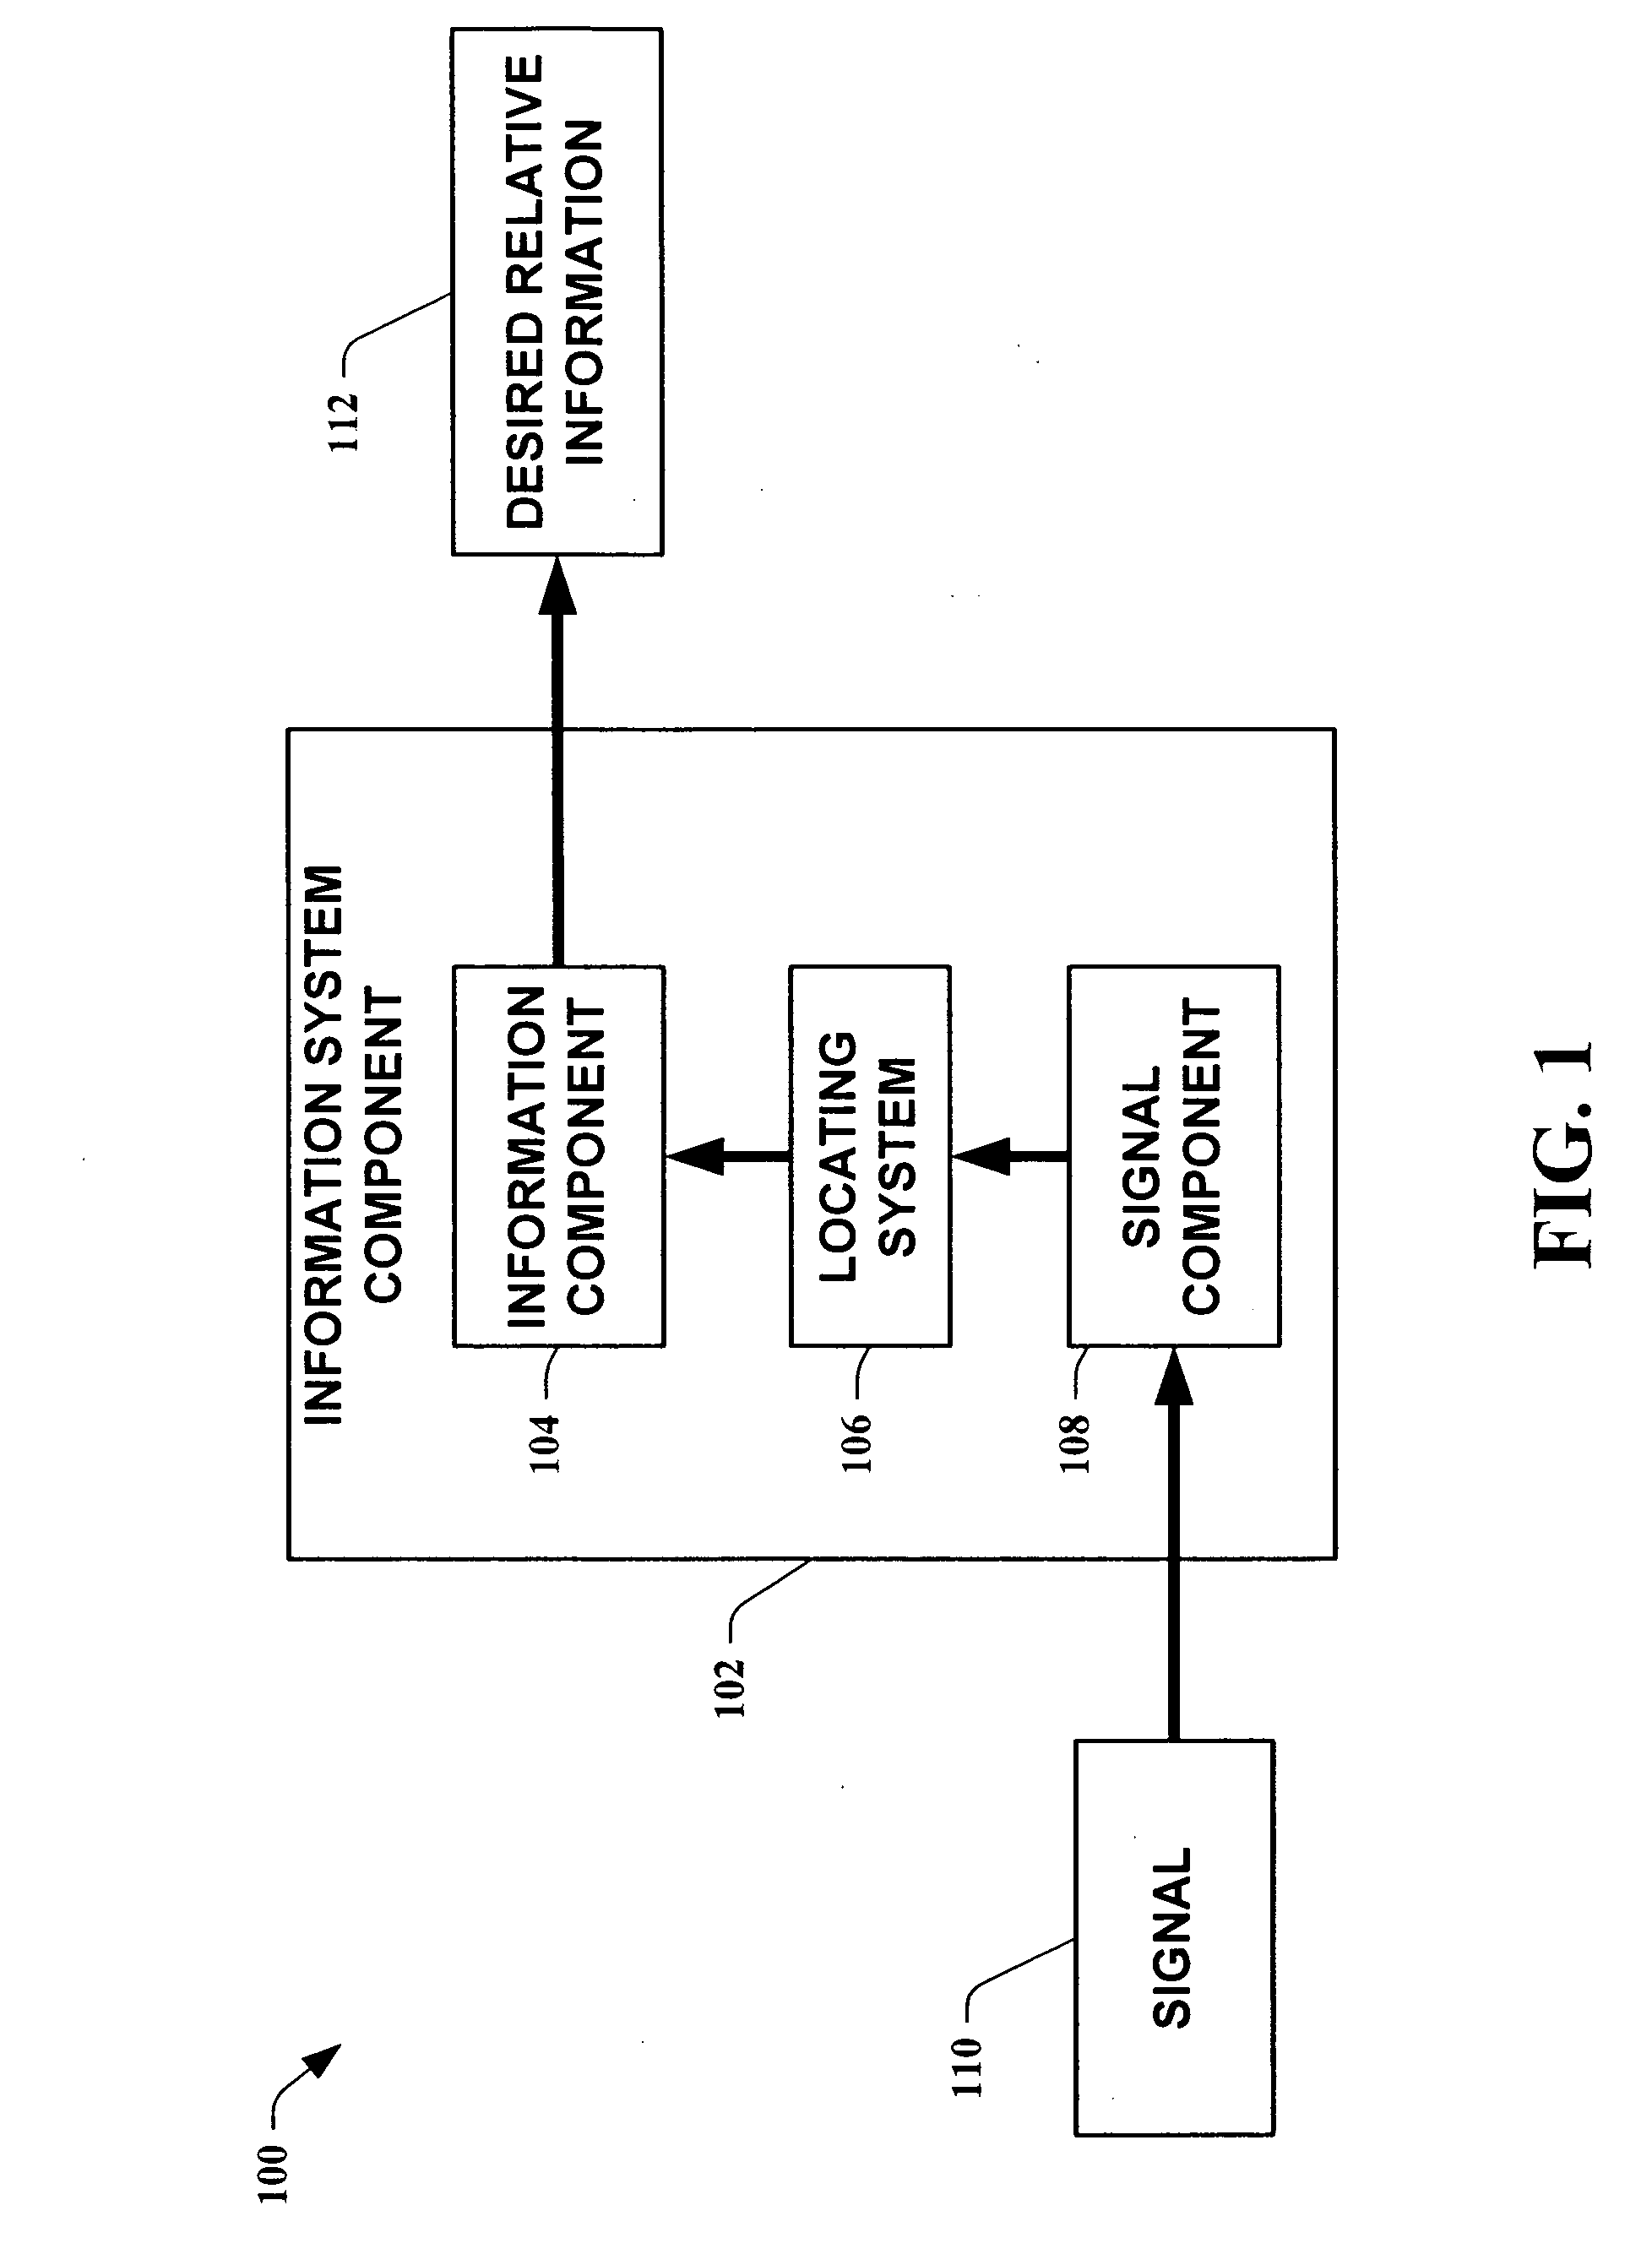 Methods for determining the approximate location of a device from ambient signals